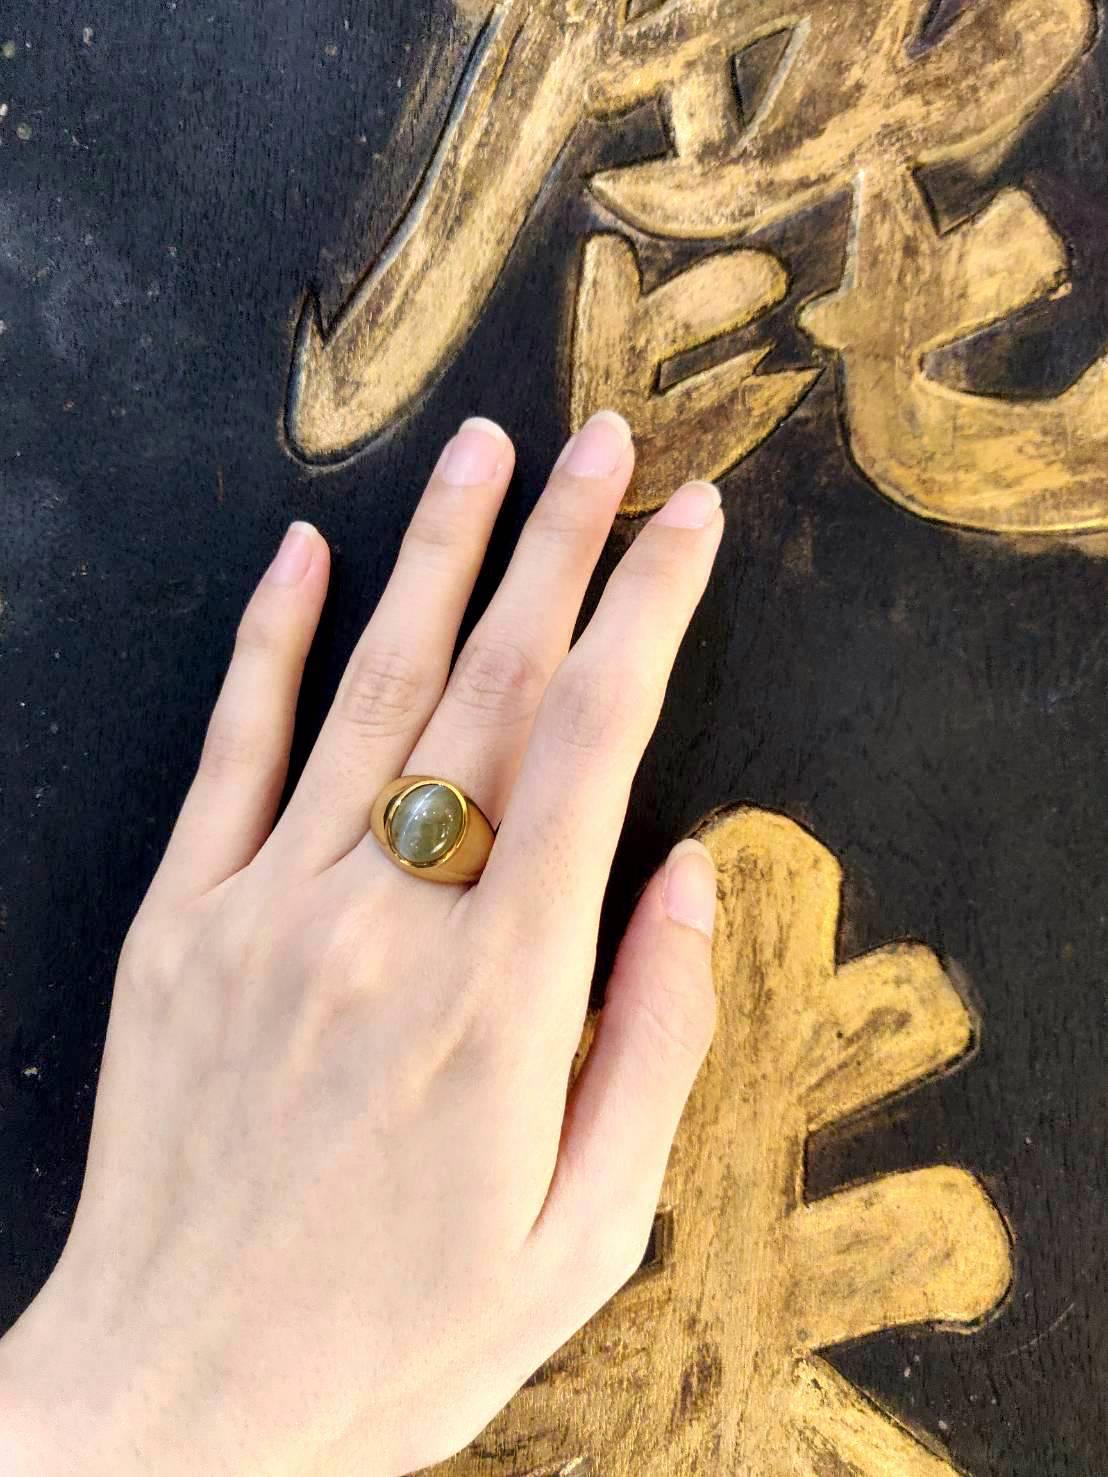 This 18k gold ring boasts rare 9.4 carat cabochon greenish yellow cat's eye chrysoberyl with sharp chatoyancy. The plain raised edge design possesses a feel of modernity which makes this luxury piece remain contemporary.

Cat's Eye Chrysoberyl: